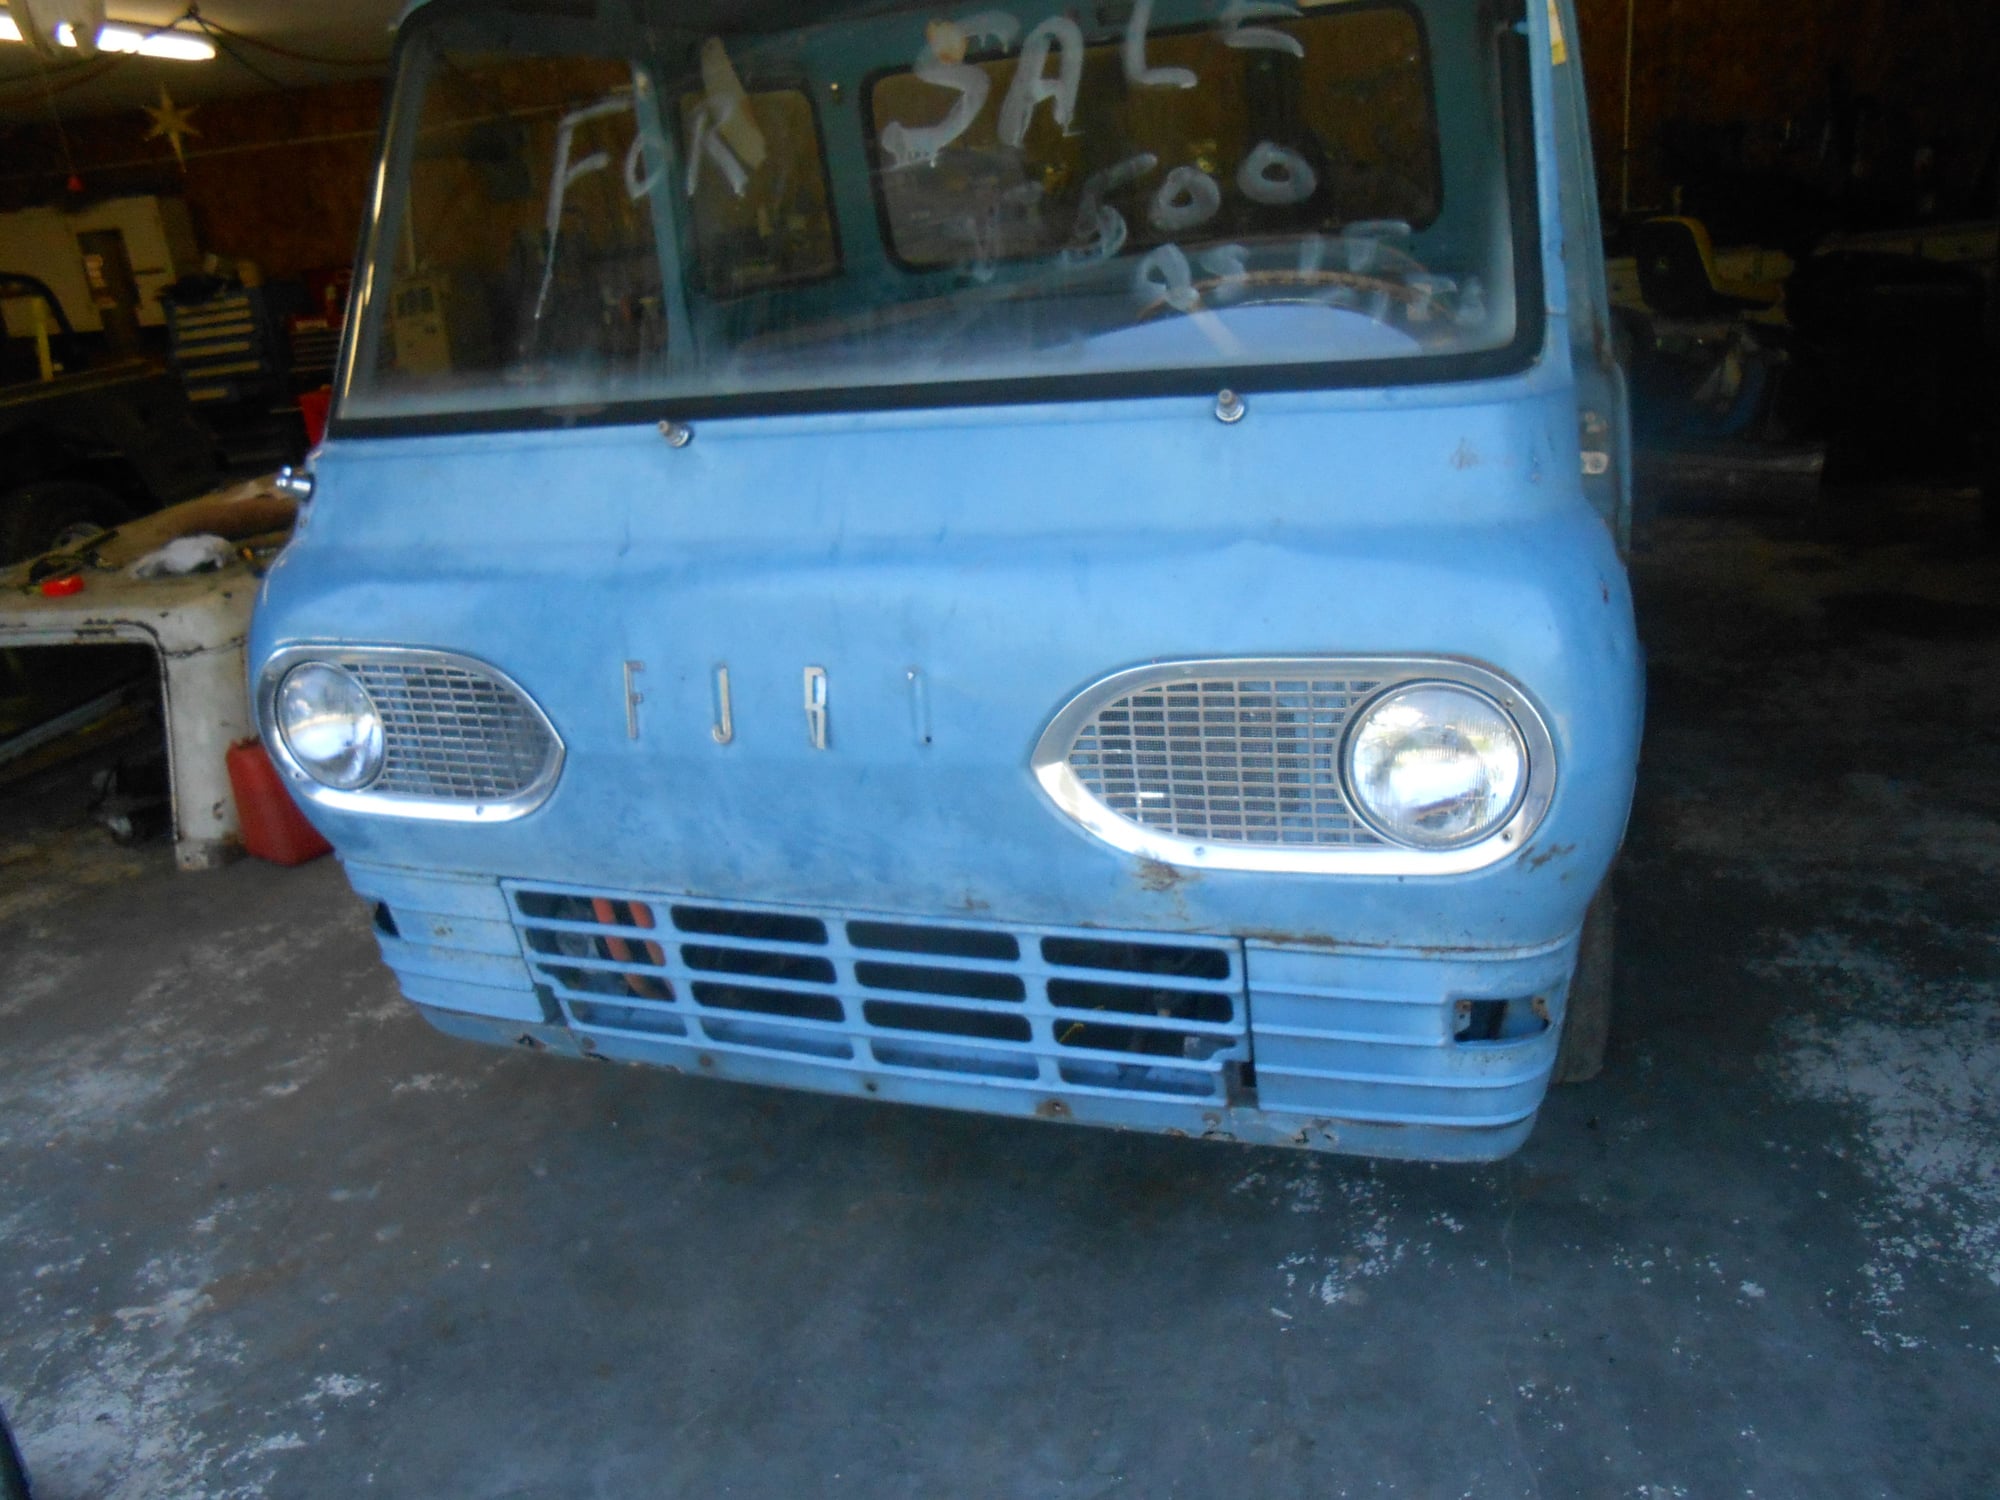 1965 Ford Econoline - 1965 Ford Econoline Truck - Used - VIN Ford Econoline - 999,999 Miles - 6 cyl - 2WD - Du Quoin, IL 62832, United States